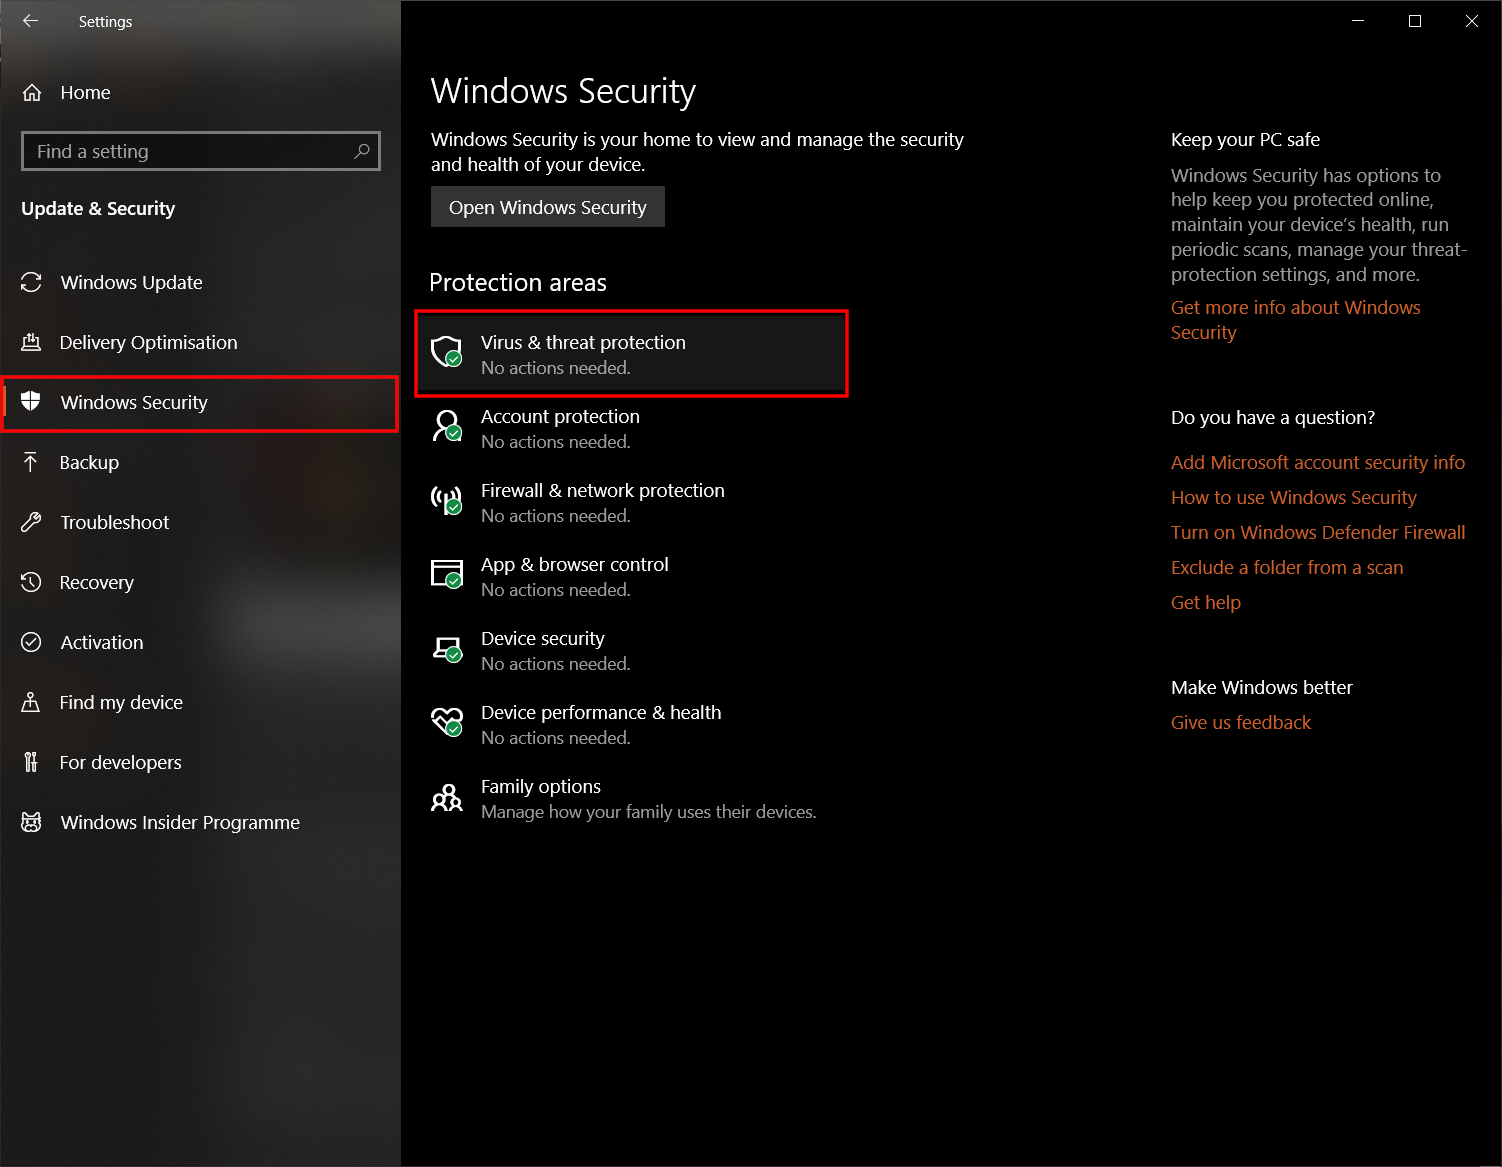 Windows 10 security settings with "Virus & thread protection" highlighted